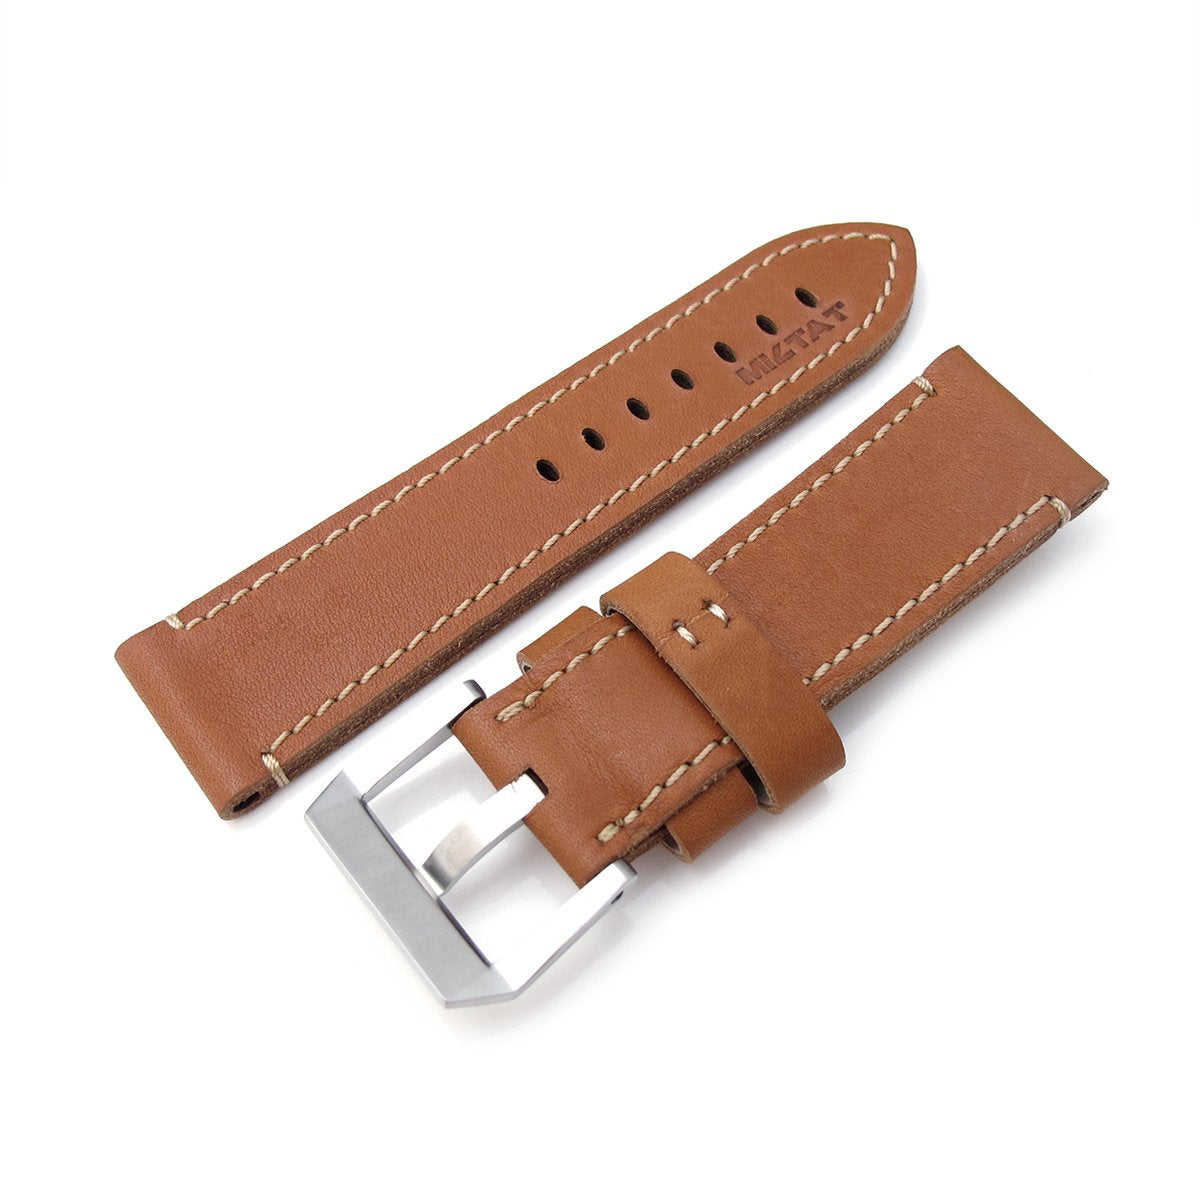 26mm MiLTAT Cashmere Calf Tan Color Watch Strap Beige Hand Stitching Strapcode Watch Bands